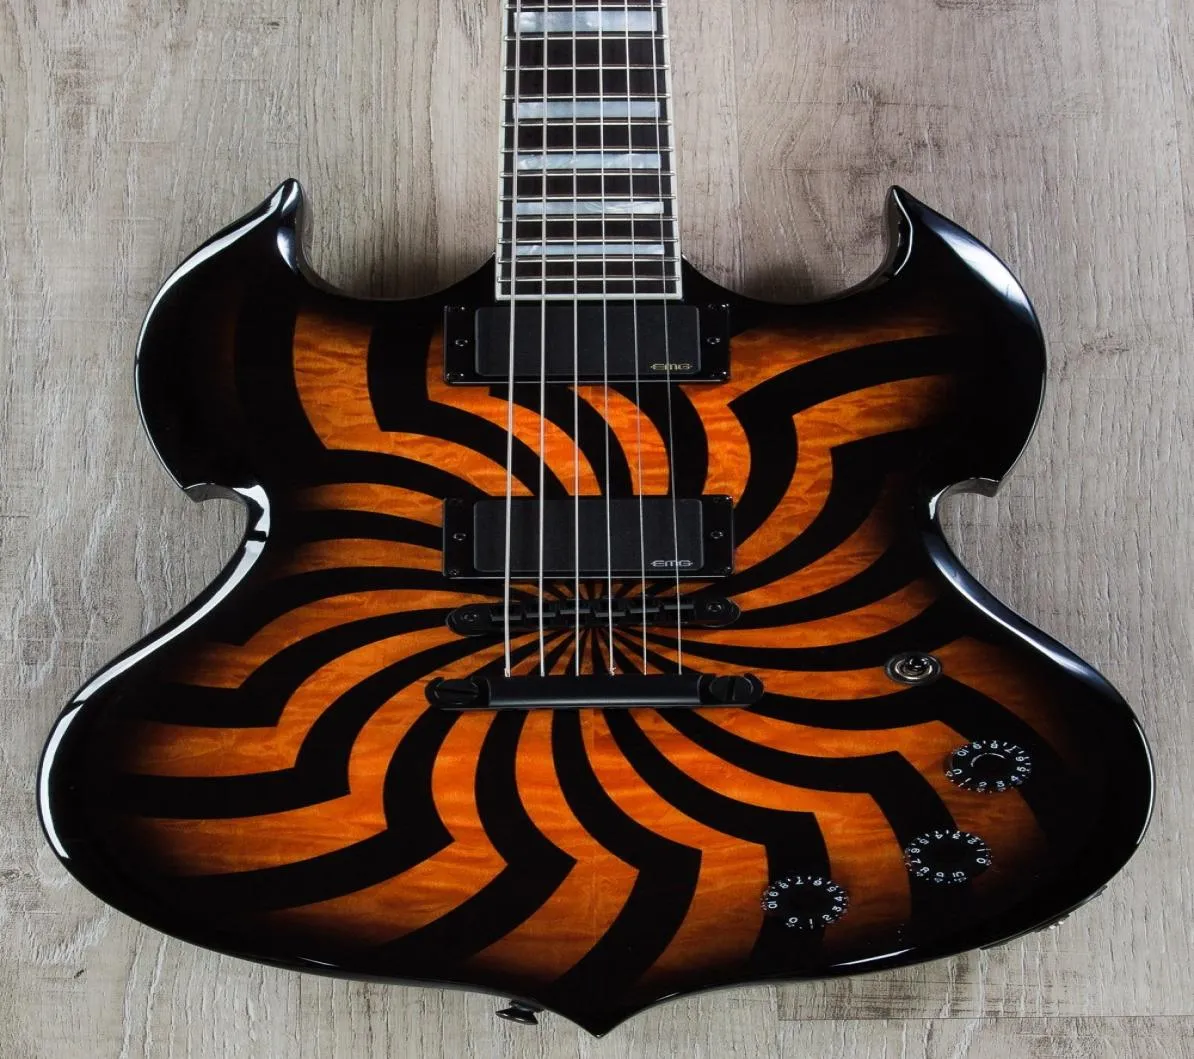 Wylde Audio Barbarian HellFire Black Buzzsaw Orange Quilted Maple Top SG Electric Guitar Large Block Inlay 3 Speed Knobs Black H8693317